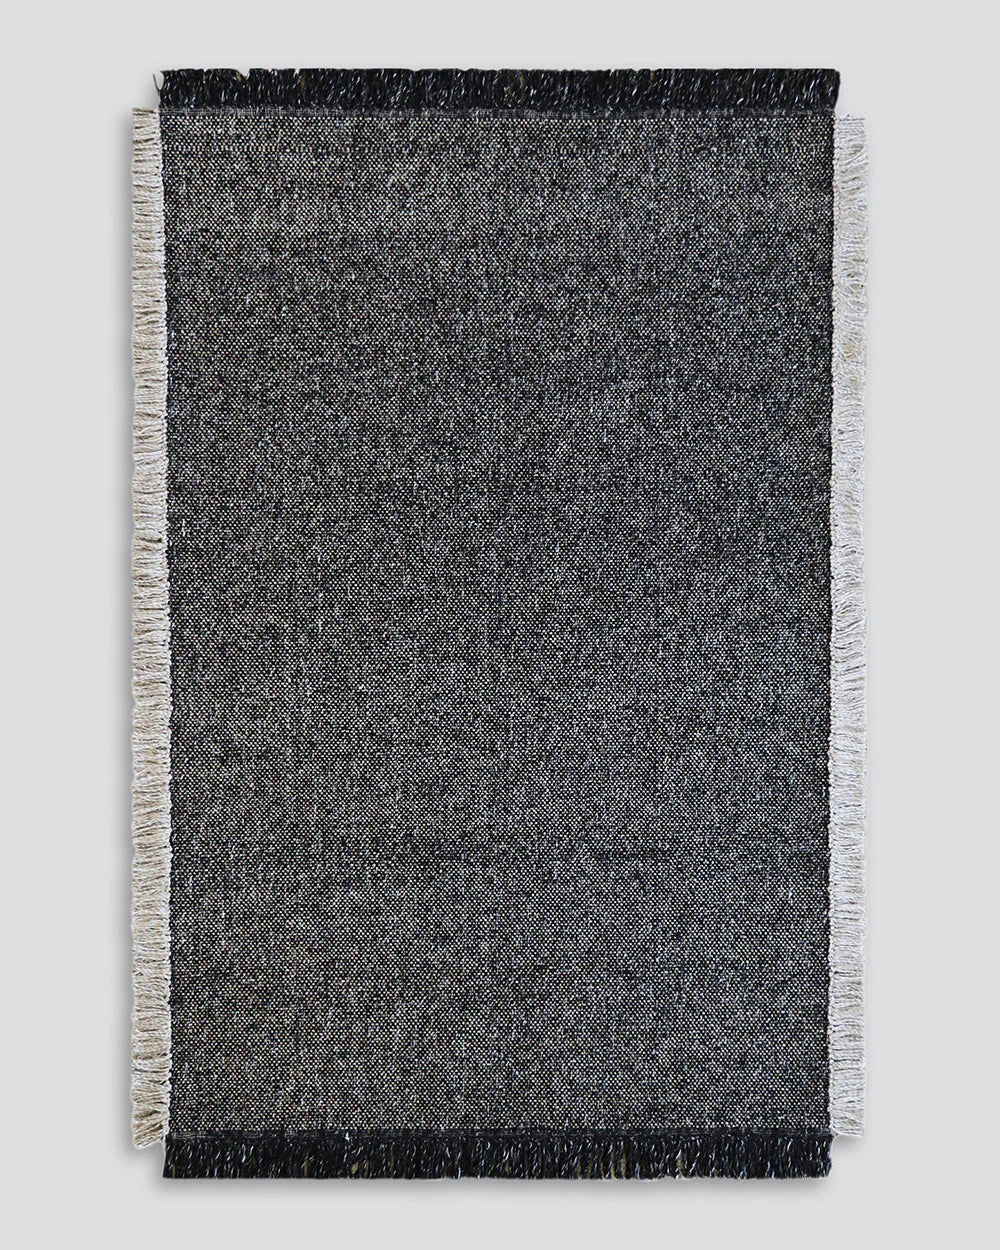 Ulster Black Natural Rug from Baya Furtex Stockist Make Your House A Home, Furniture Store Bendigo. Free Australia Wide Delivery. Mulberi Rugs.